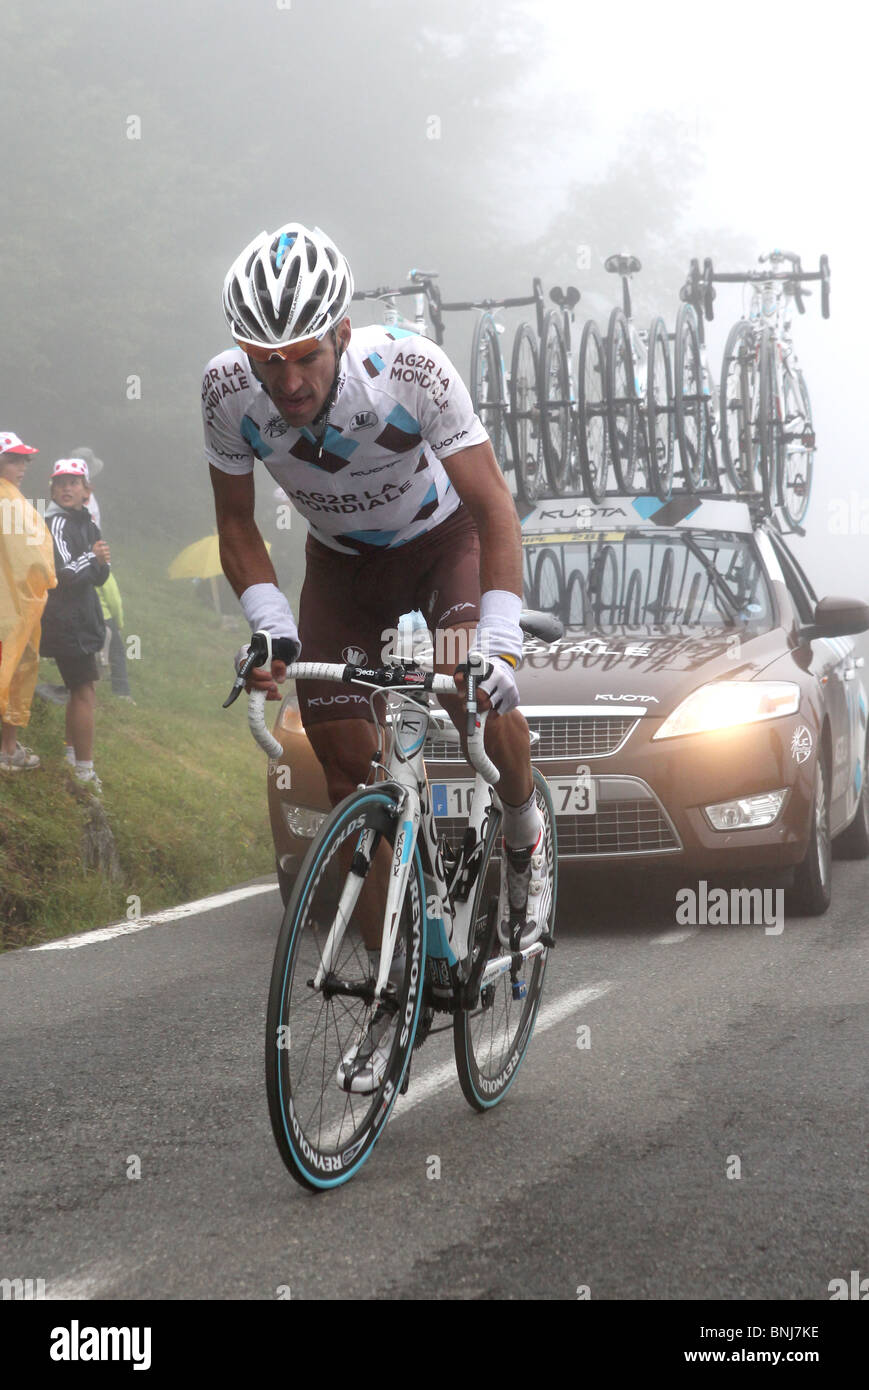 AG2R La Mondiale cyclist competing in stage 17 of the 2010 Tour de France on the Col du Tourmalet in the French Pyrenees Stock Photo